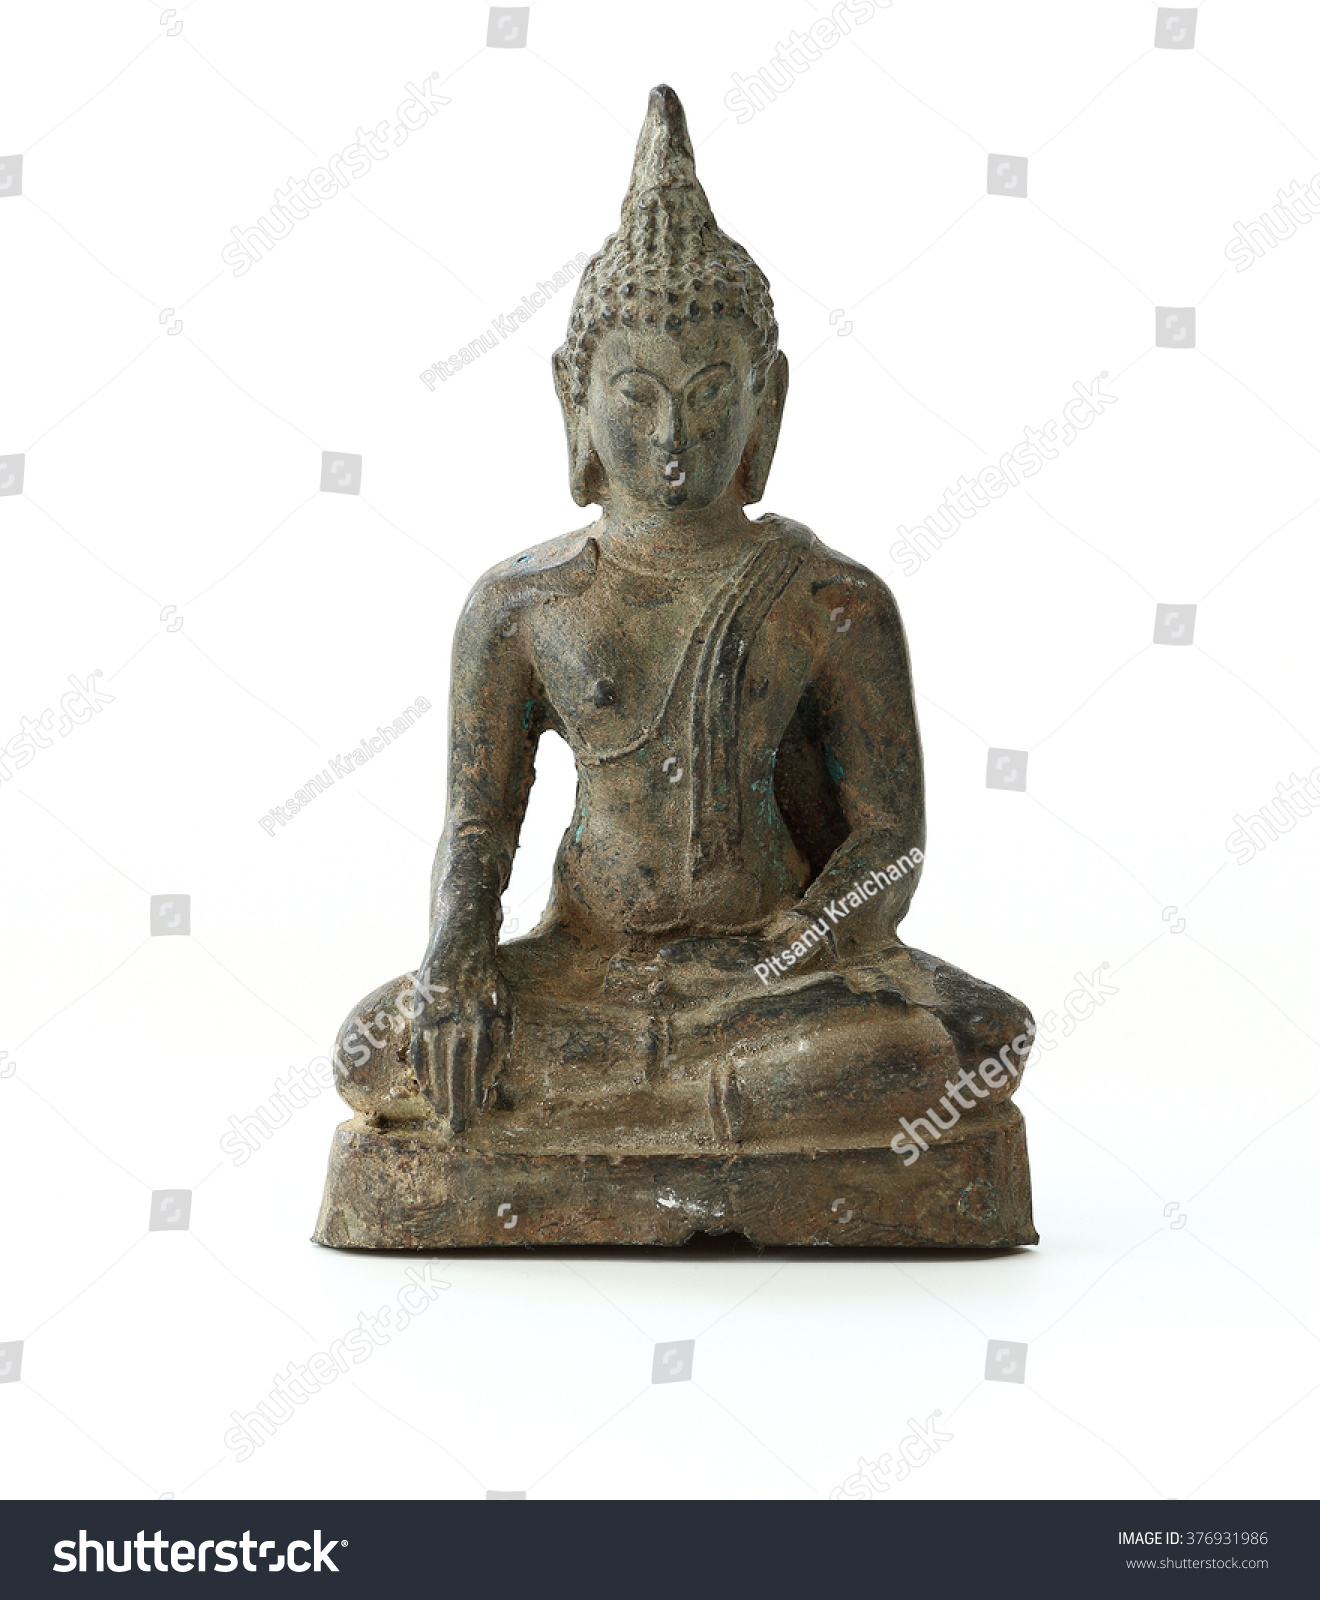 Buddha Statue Old Metal Antique On Stock Photo 376931986 - Shutterstock